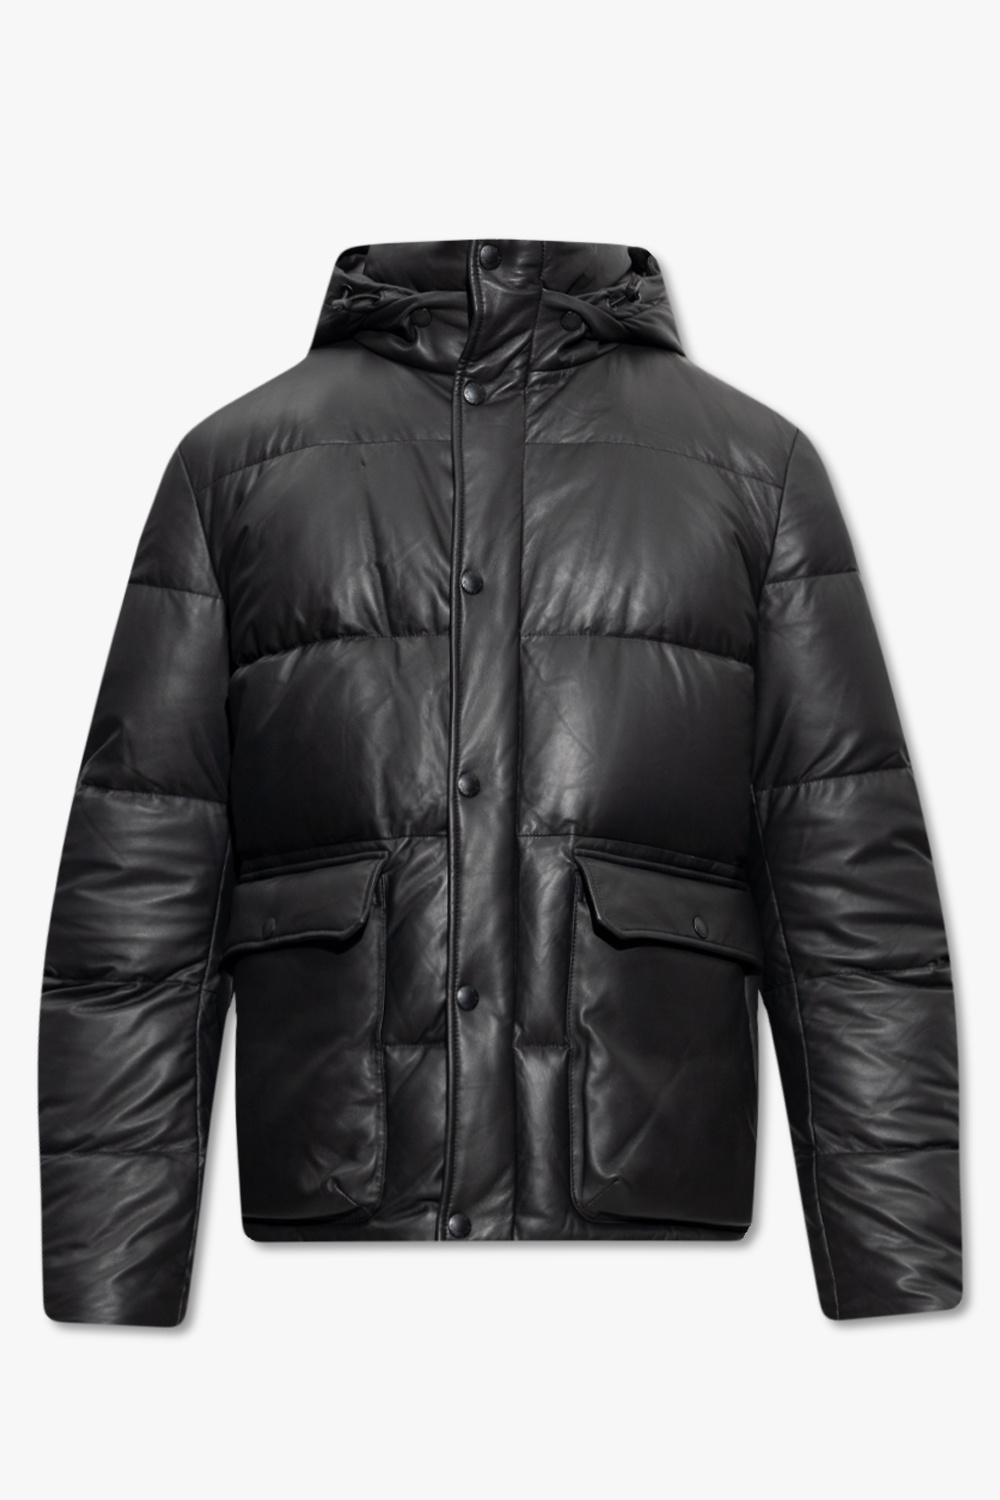 Yves Salomon White Quilted Down Jacket